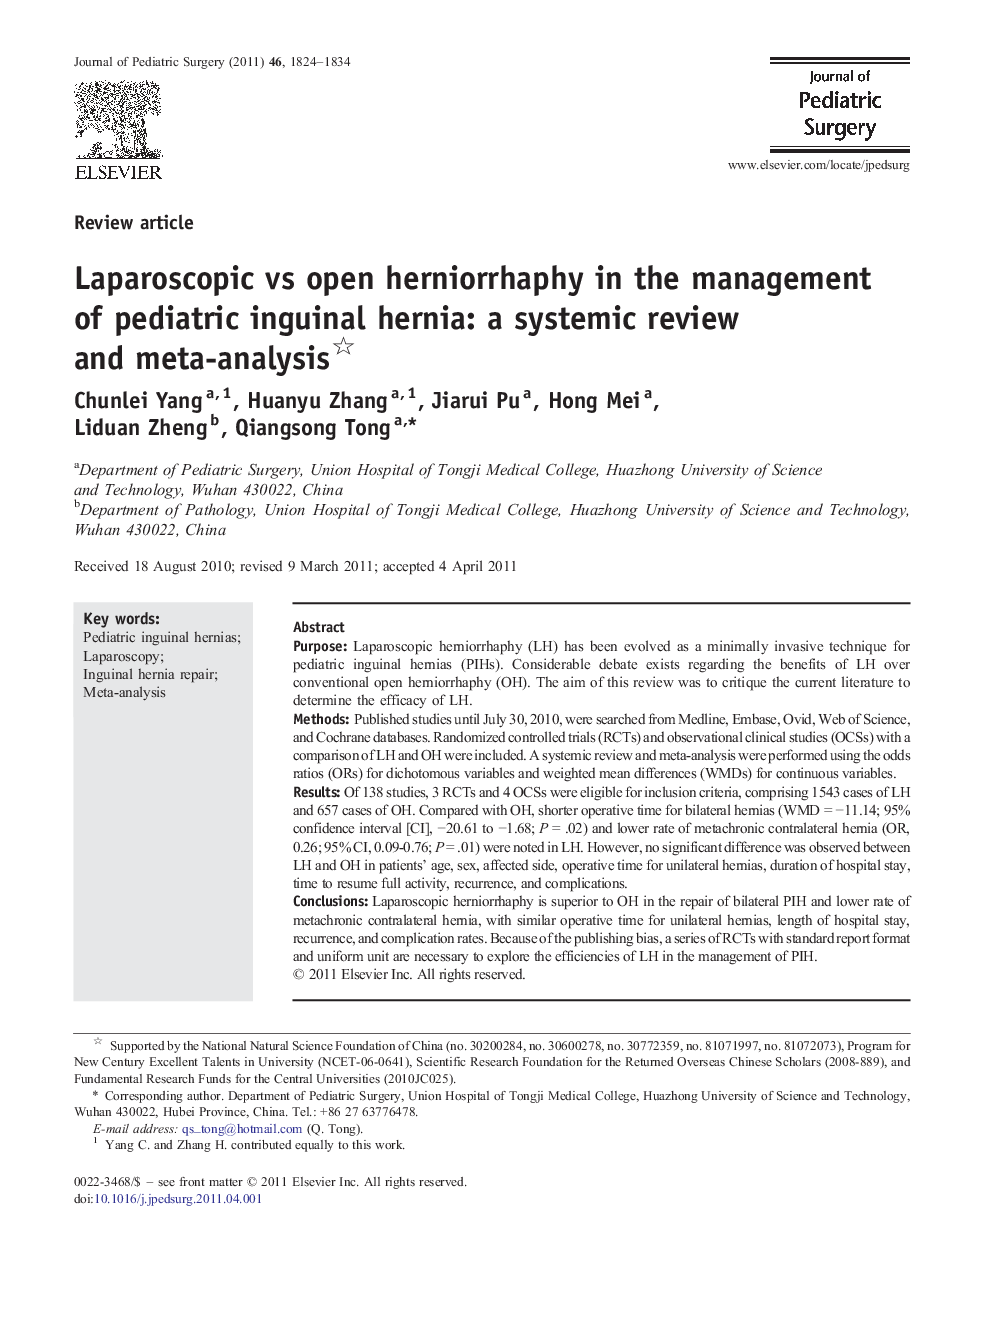 Laparoscopic vs open herniorrhaphy in the management of pediatric inguinal hernia: a systemic review and meta-analysis 